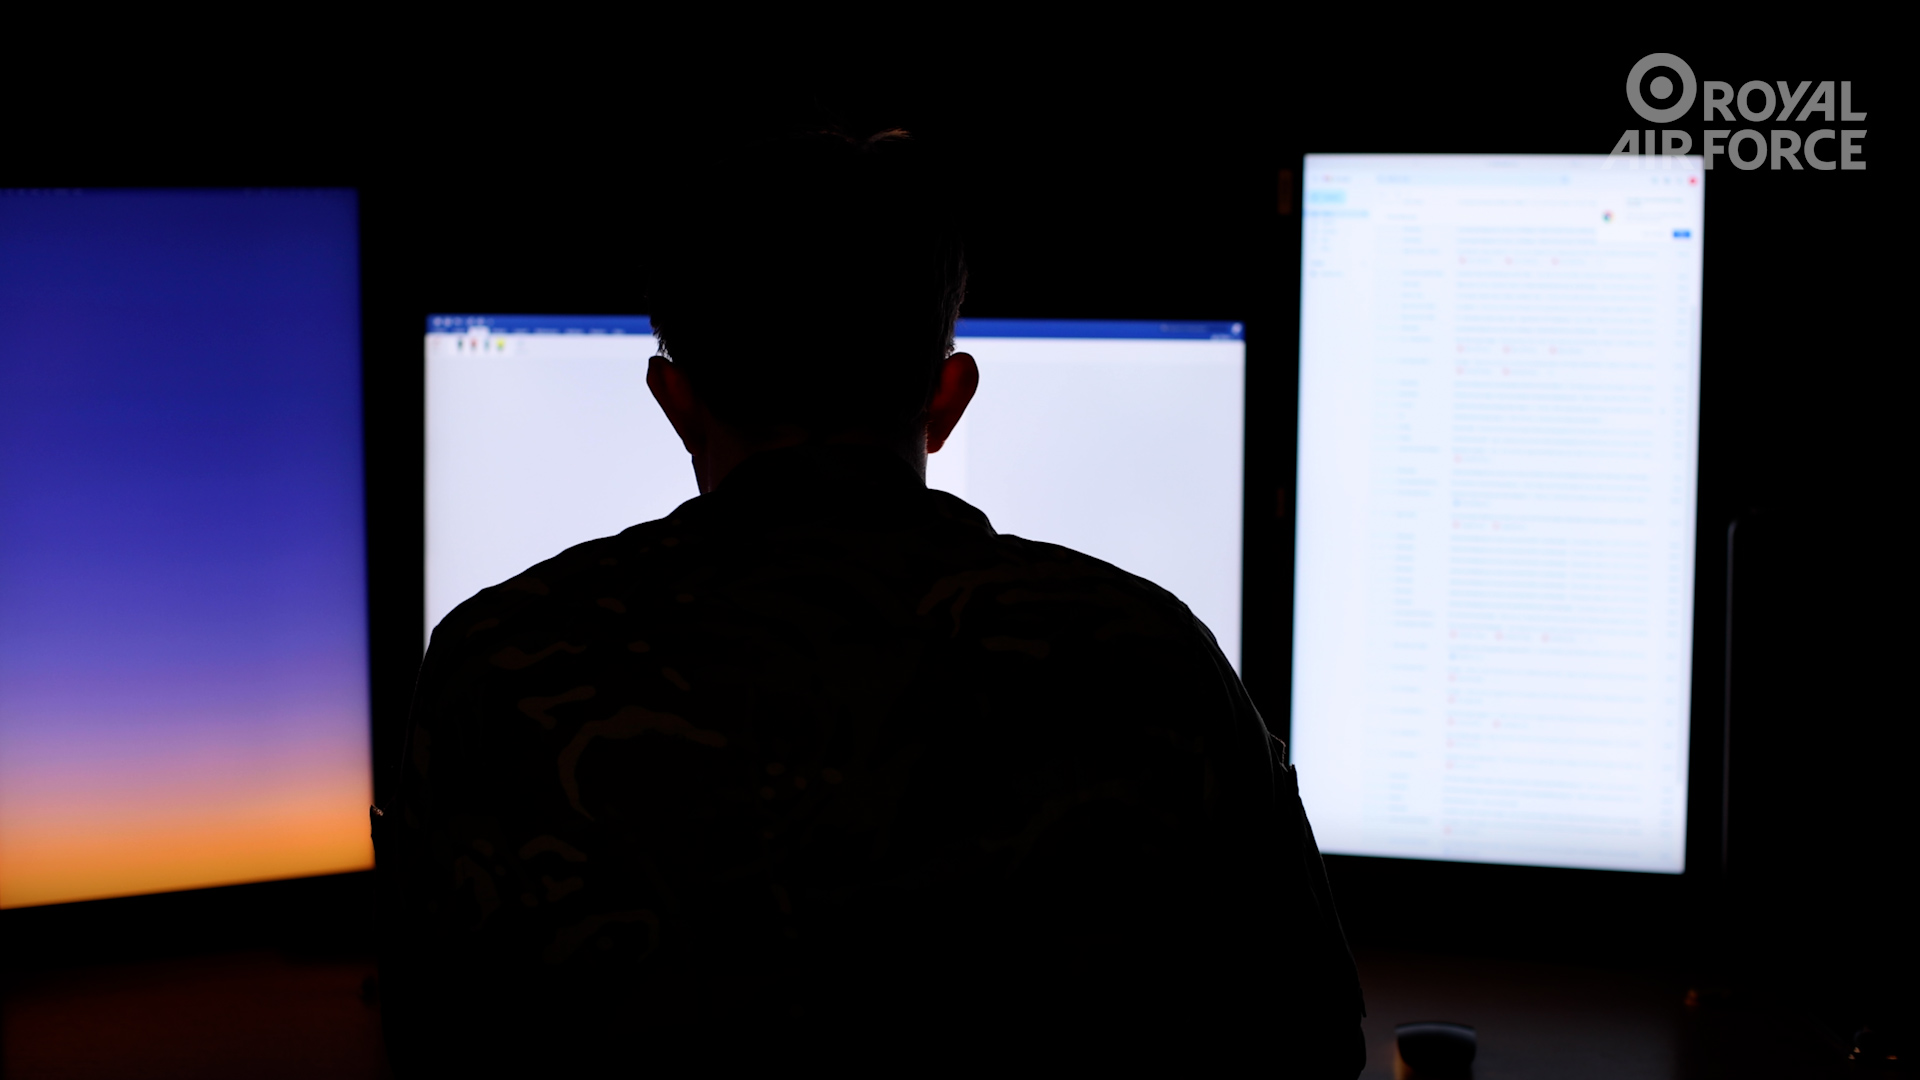 Male silhouette, seated facing three bright monitor screens.